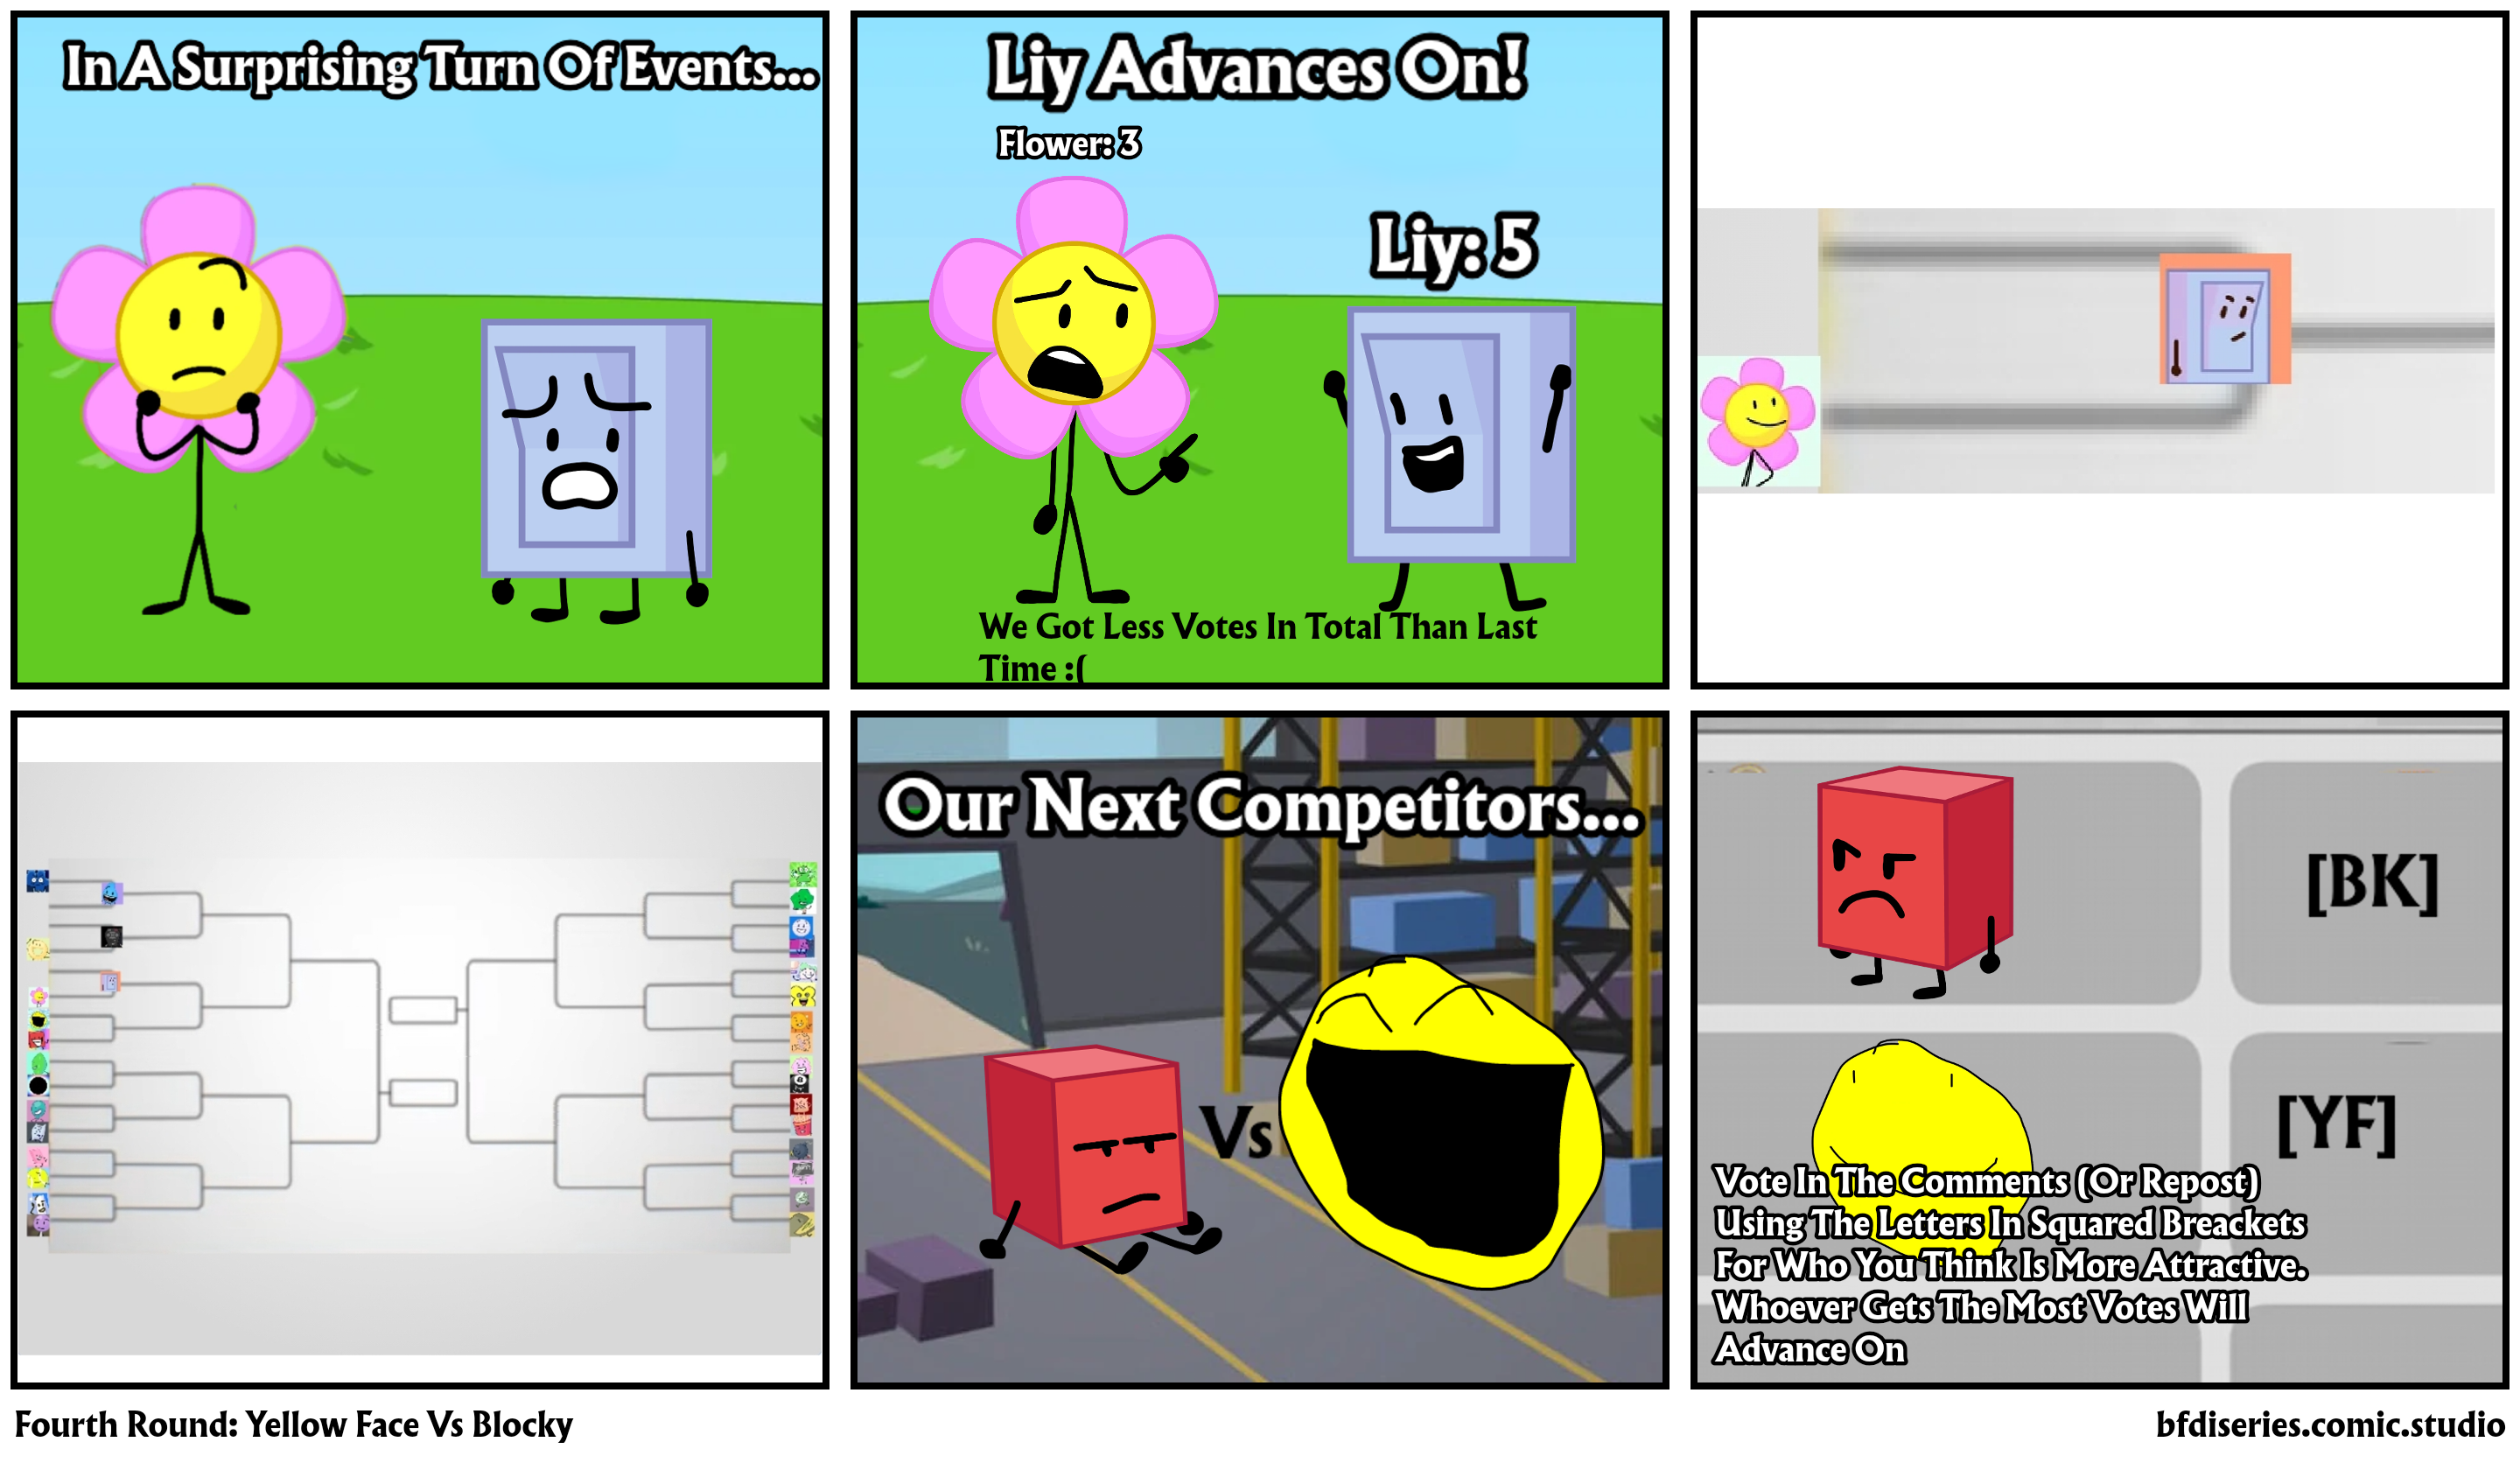 Fourth Round: Yellow Face Vs Blocky